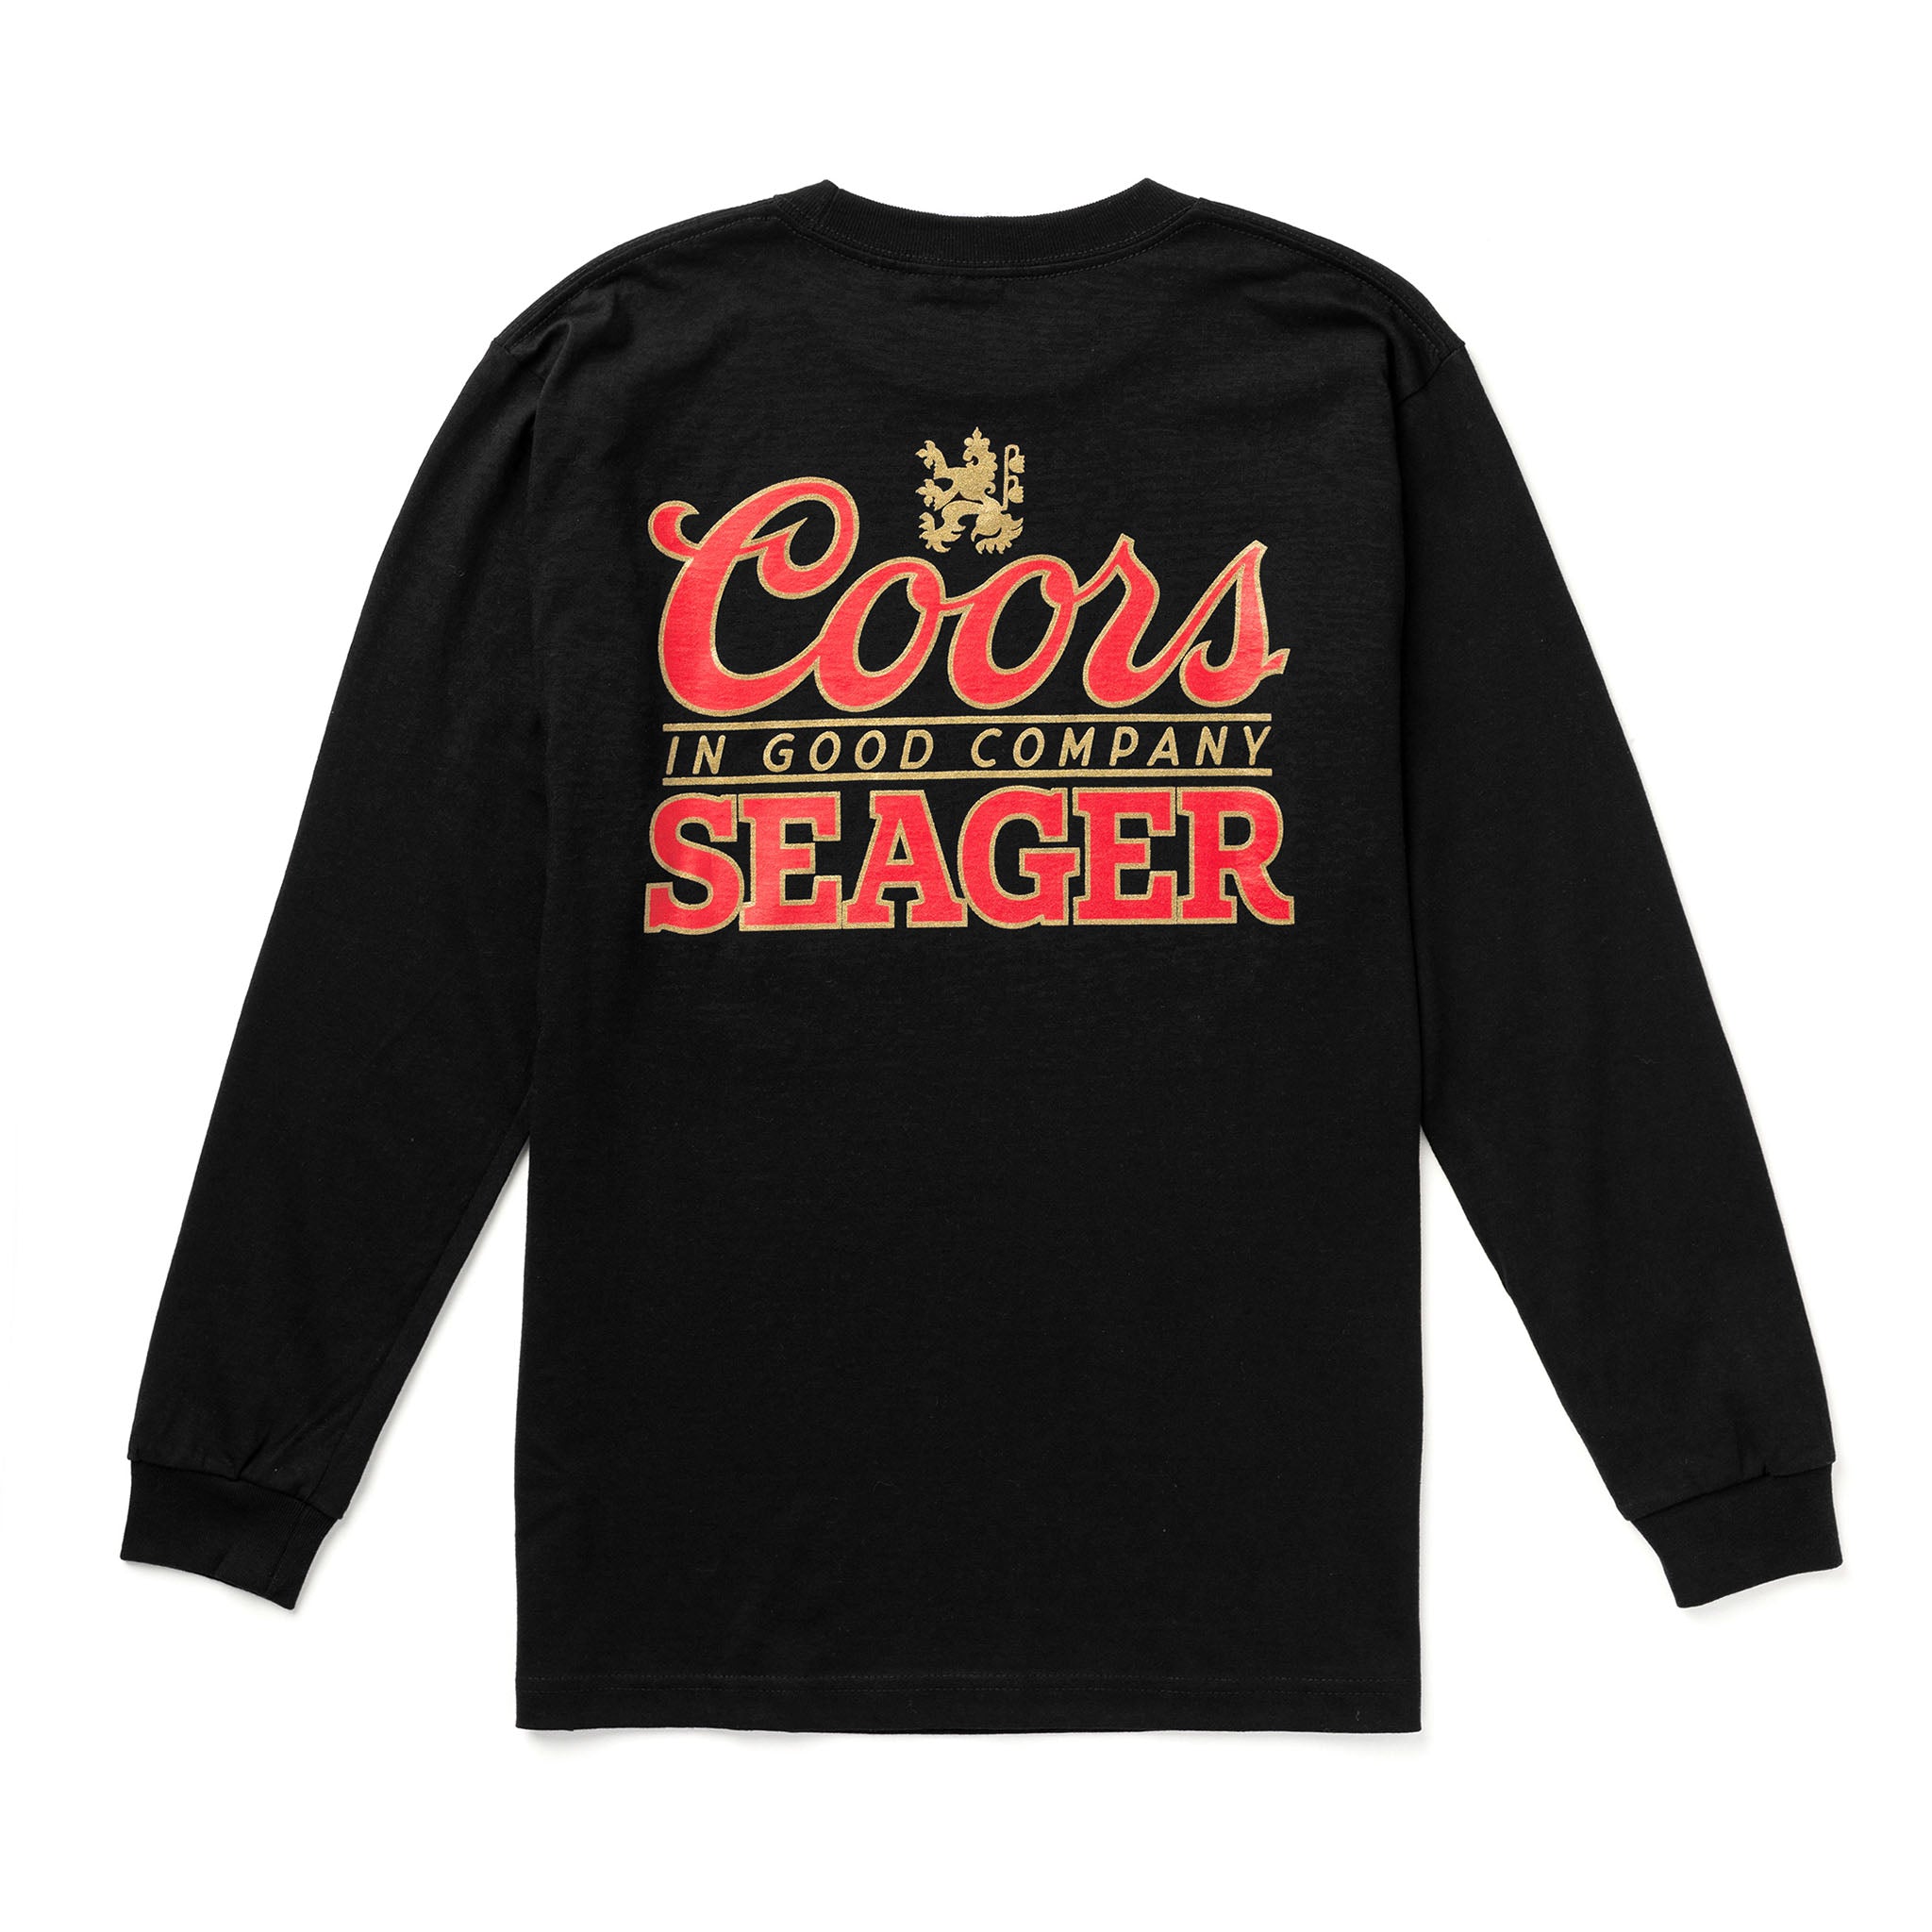 SEAGER X COORS BANQUET BRAND L/S TEE BLACK